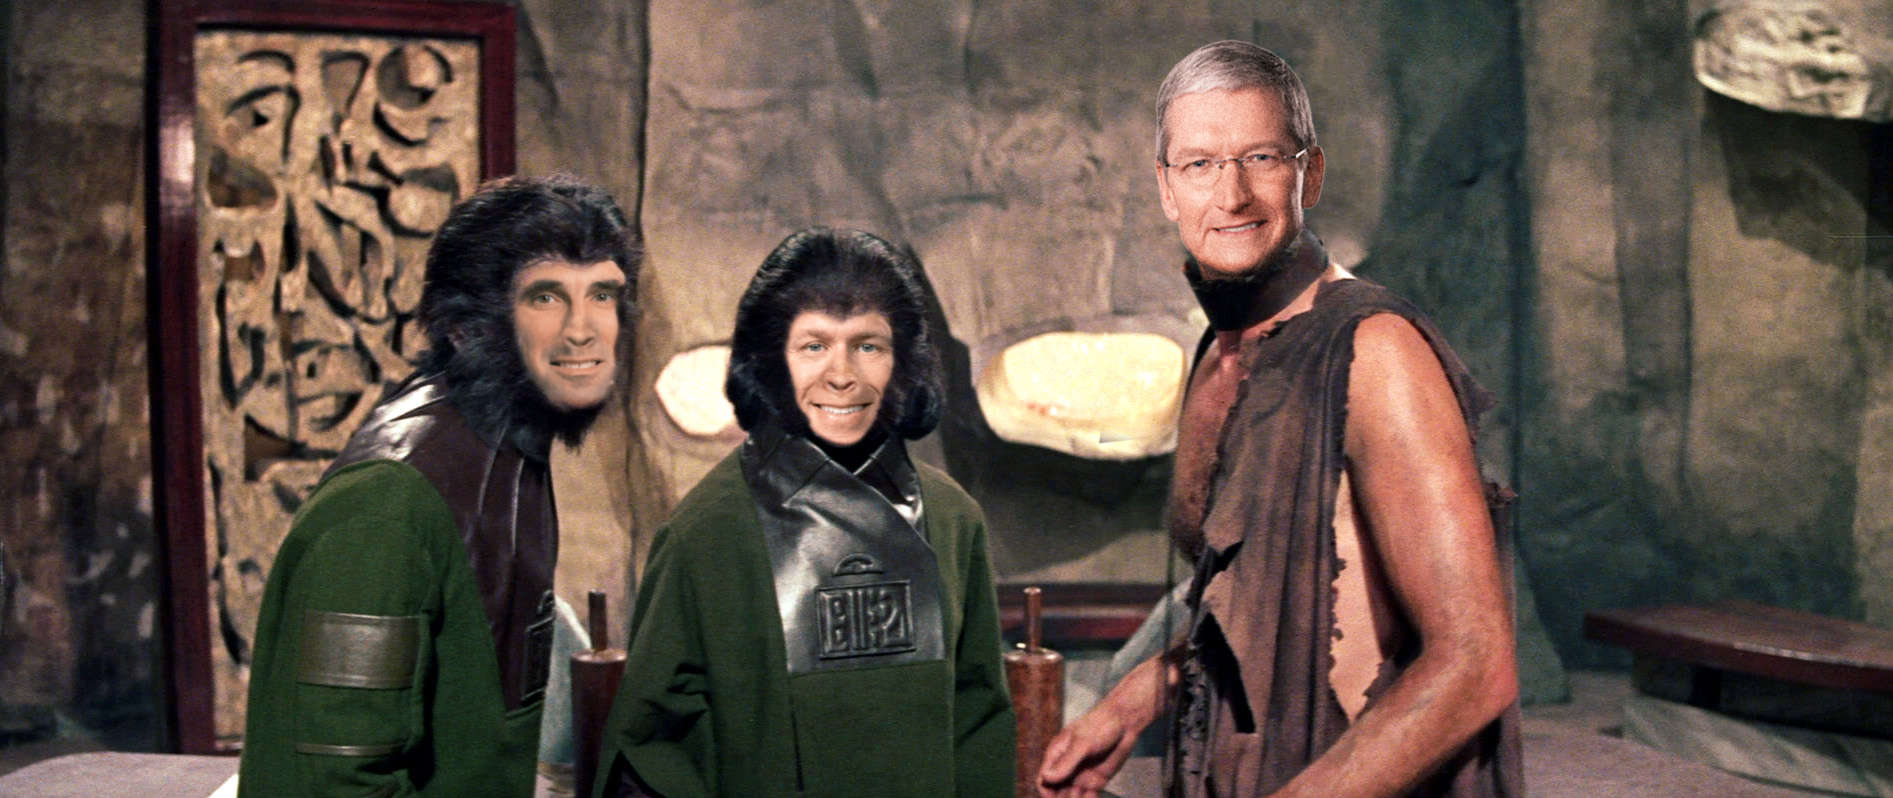 planet of the apes with tim cook